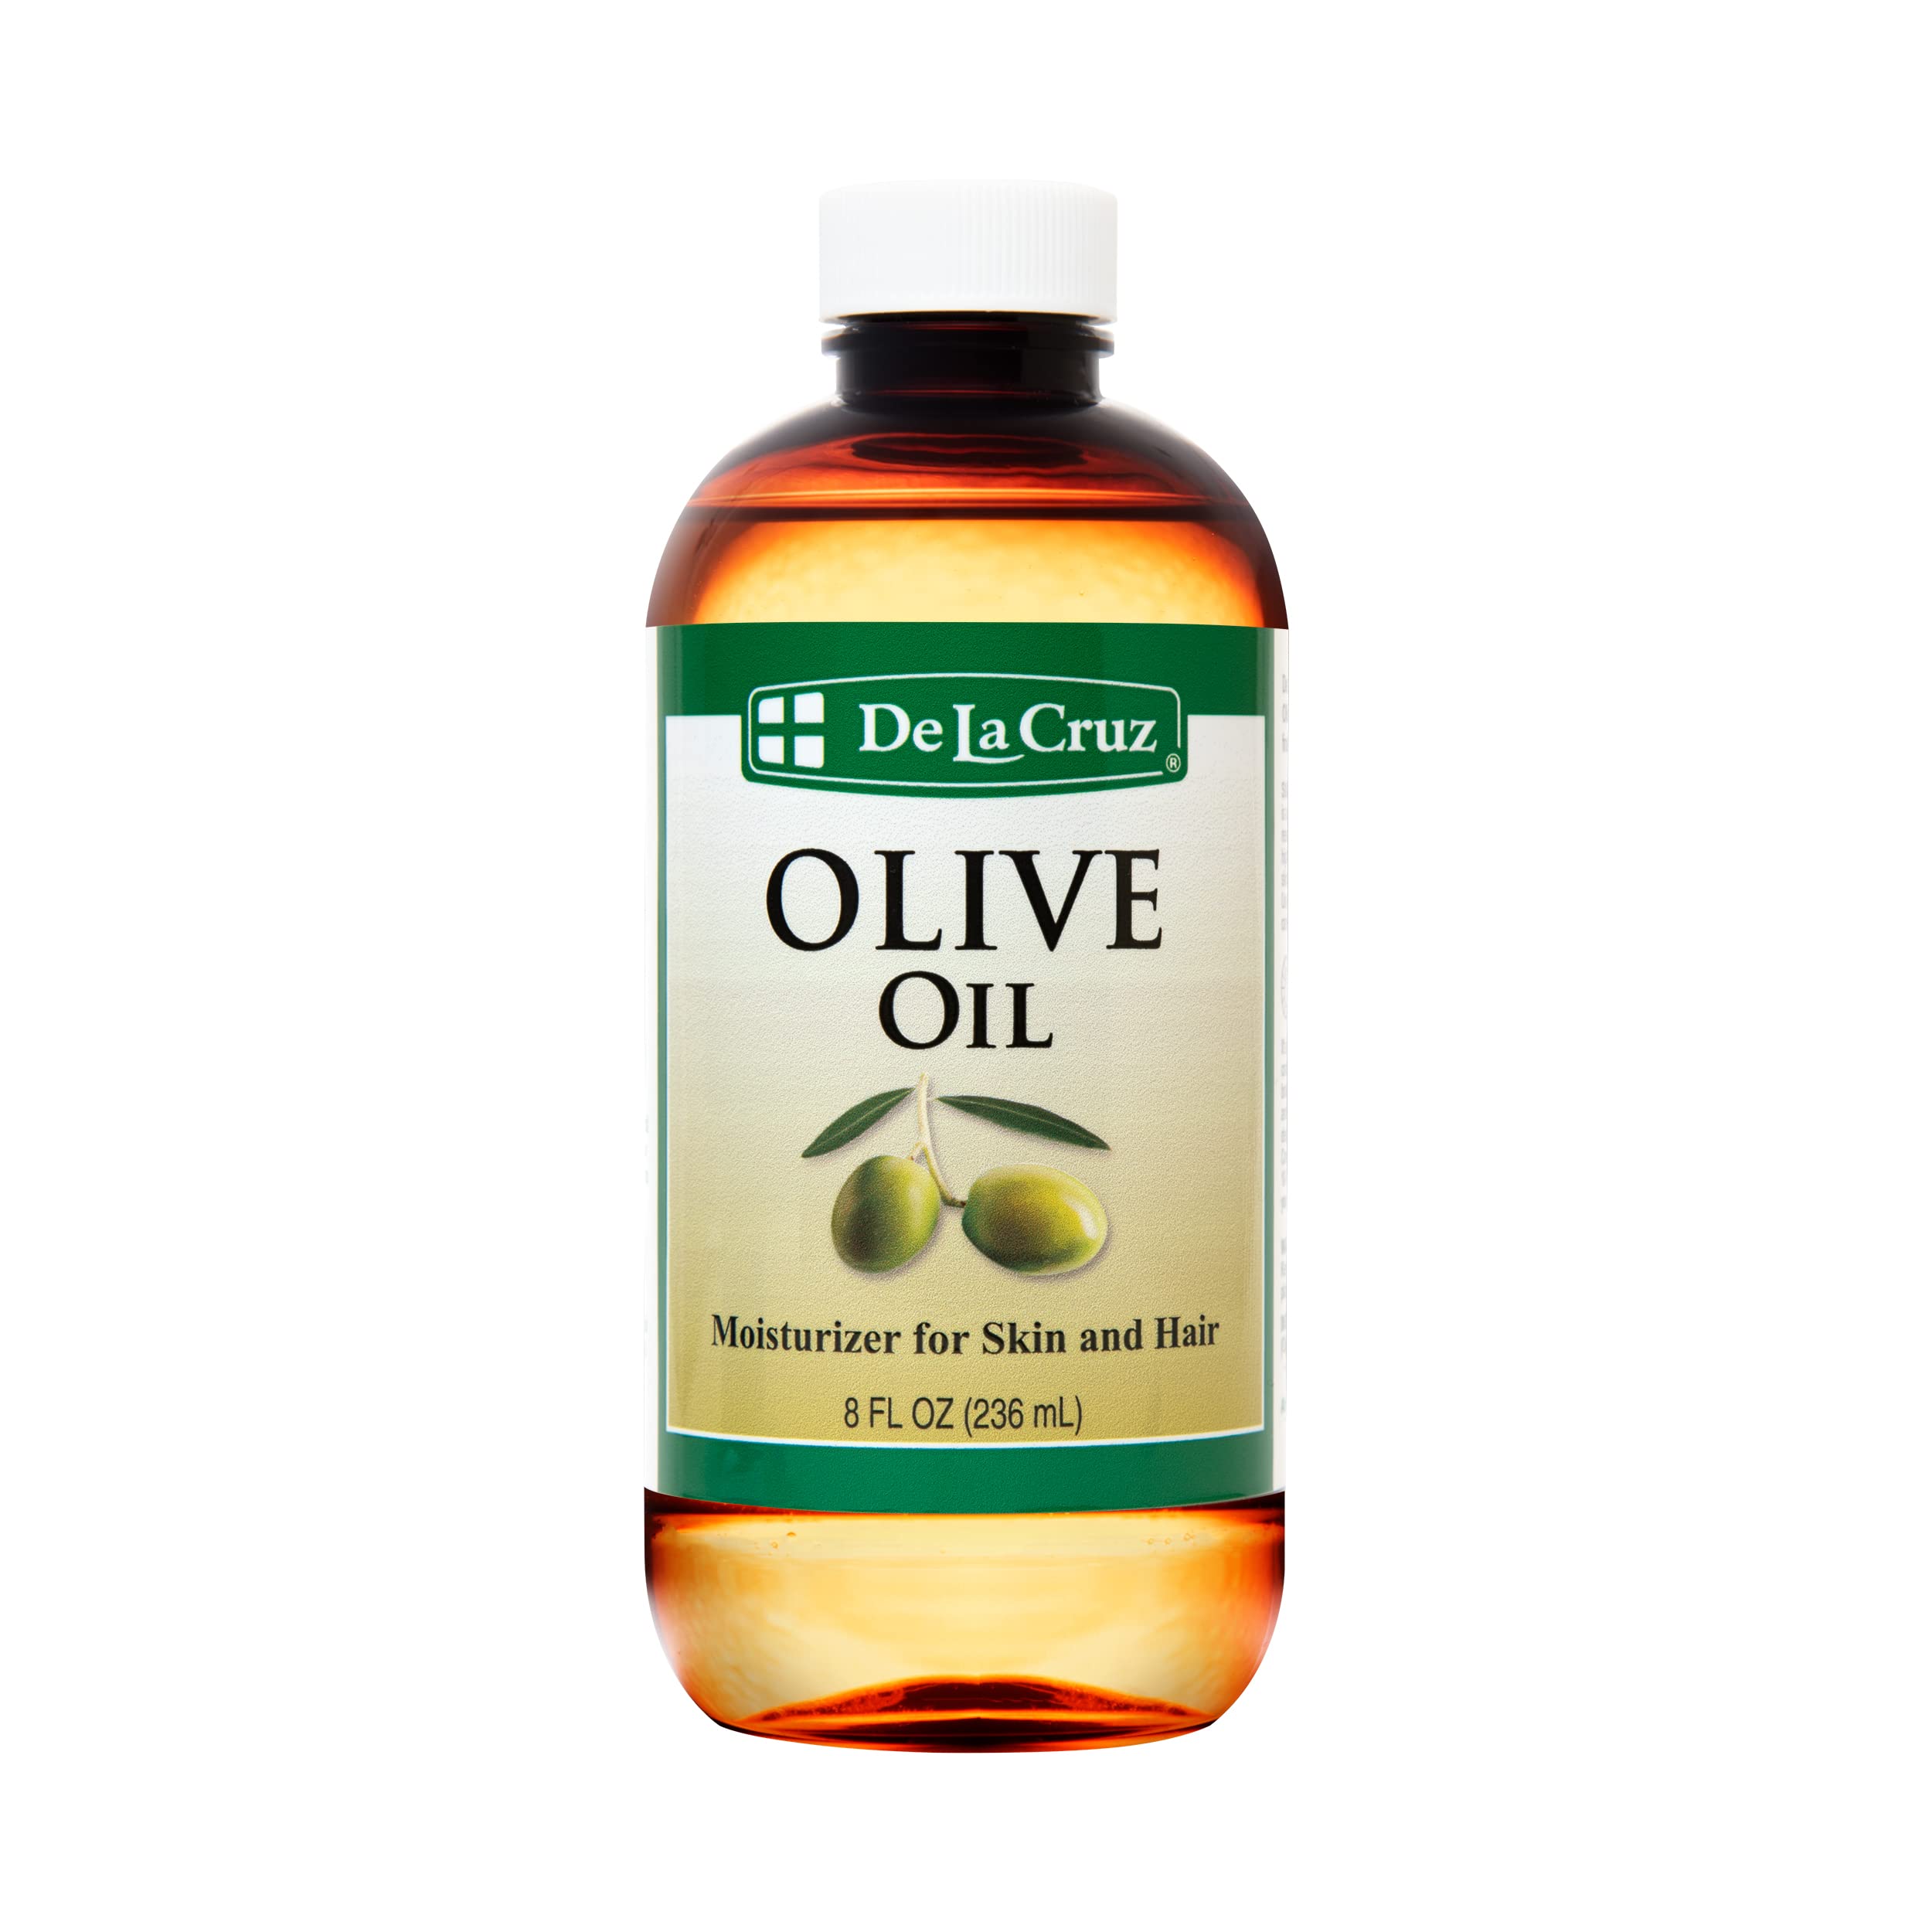  De La Cruz Pure Olive Oil - Natural Expeller Pressed Olive Oil  for Hair and Skin - Lightweight Body Oil for Dry Skin 2 Fl Oz (12 Bottles)  : Beauty & Personal Care